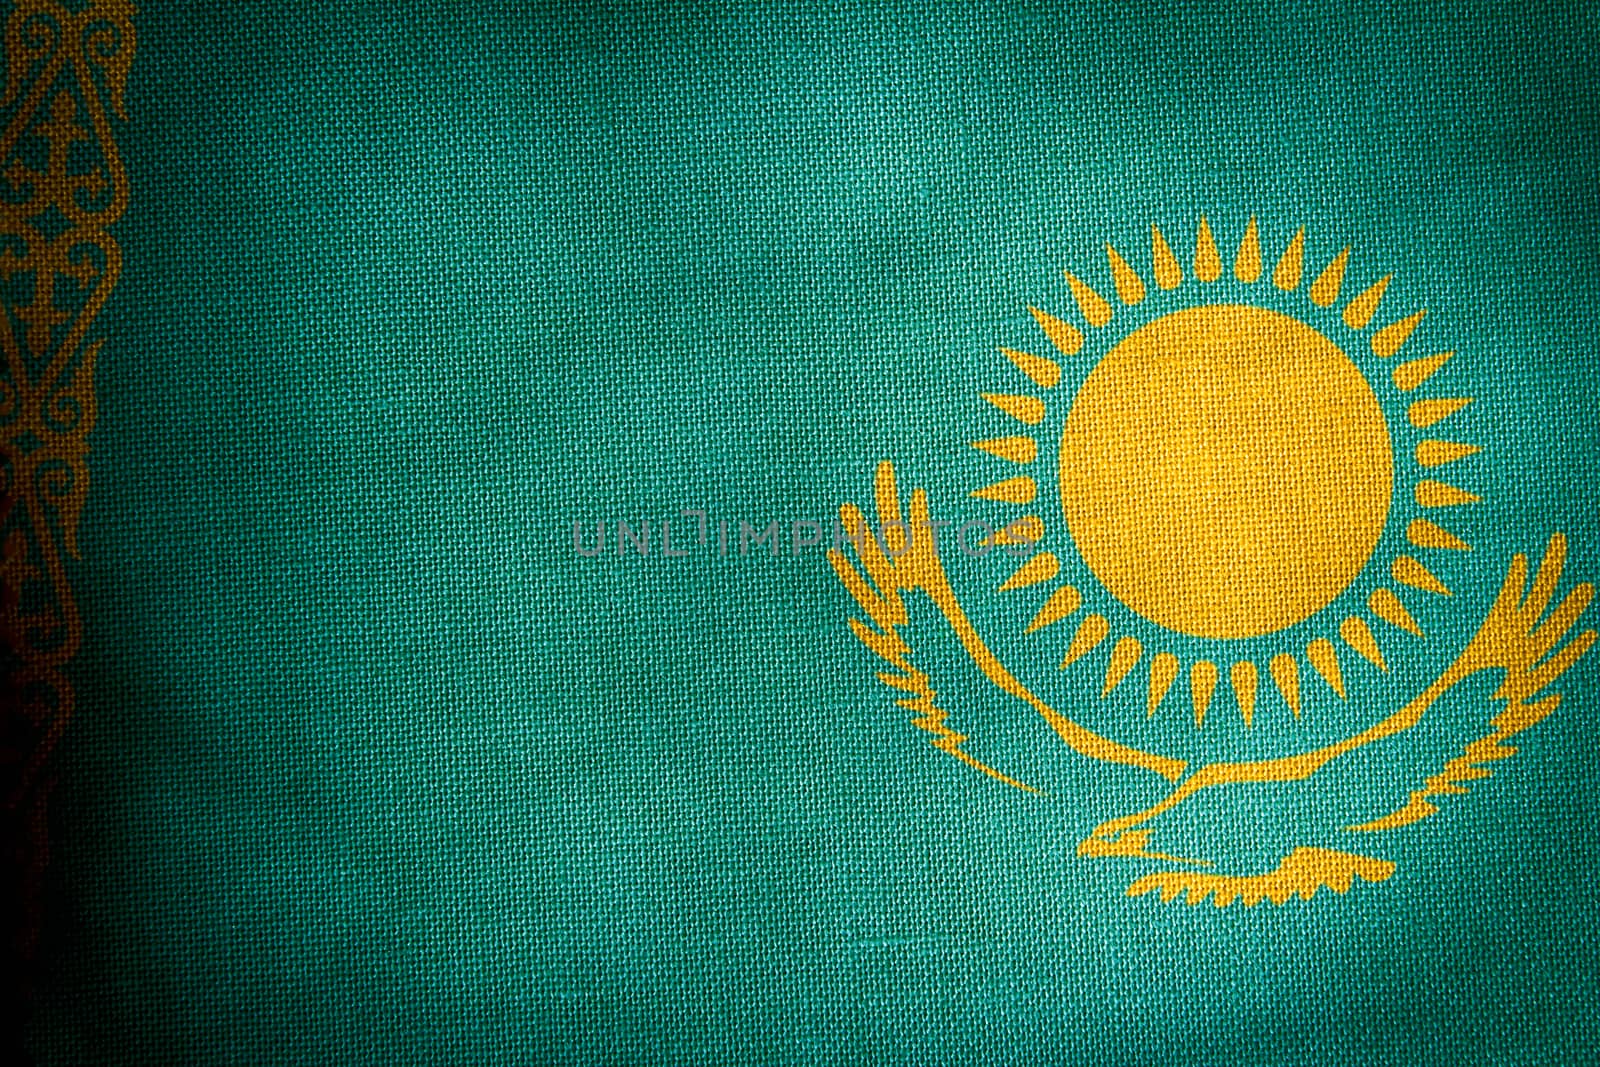 The central part of the flag of the state of Kazakhstan